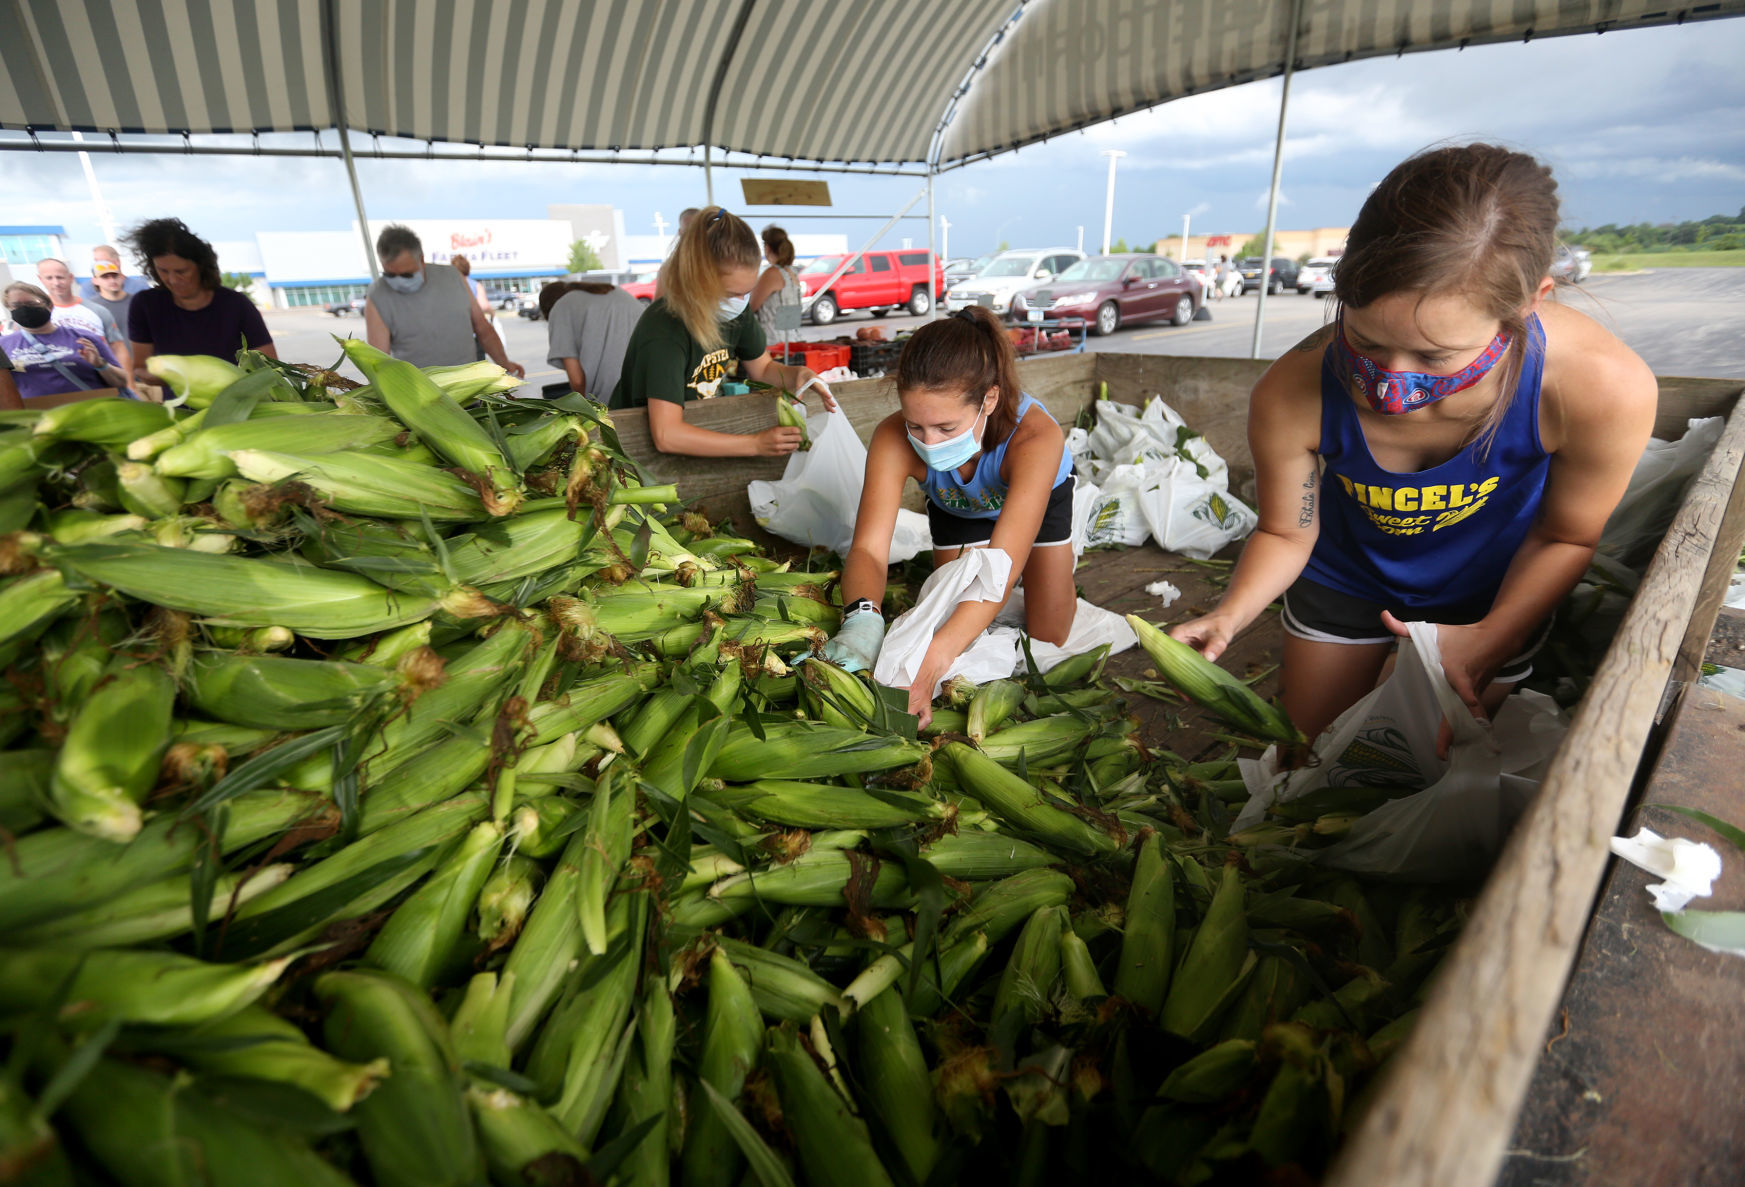 Ashlynn Murphy (from left), Jolyn Thomas and Natalie Marugg bag sweet corn during opening day of Fincel’s Sweet Corn at Blain’s Farm & Fleet parking lot in Dubuque on Saturday. Fincel’s also has a location at the former Shopko building at 255 John F. Kennedy Road. PHOTO CREDIT: JESSICA REILLY